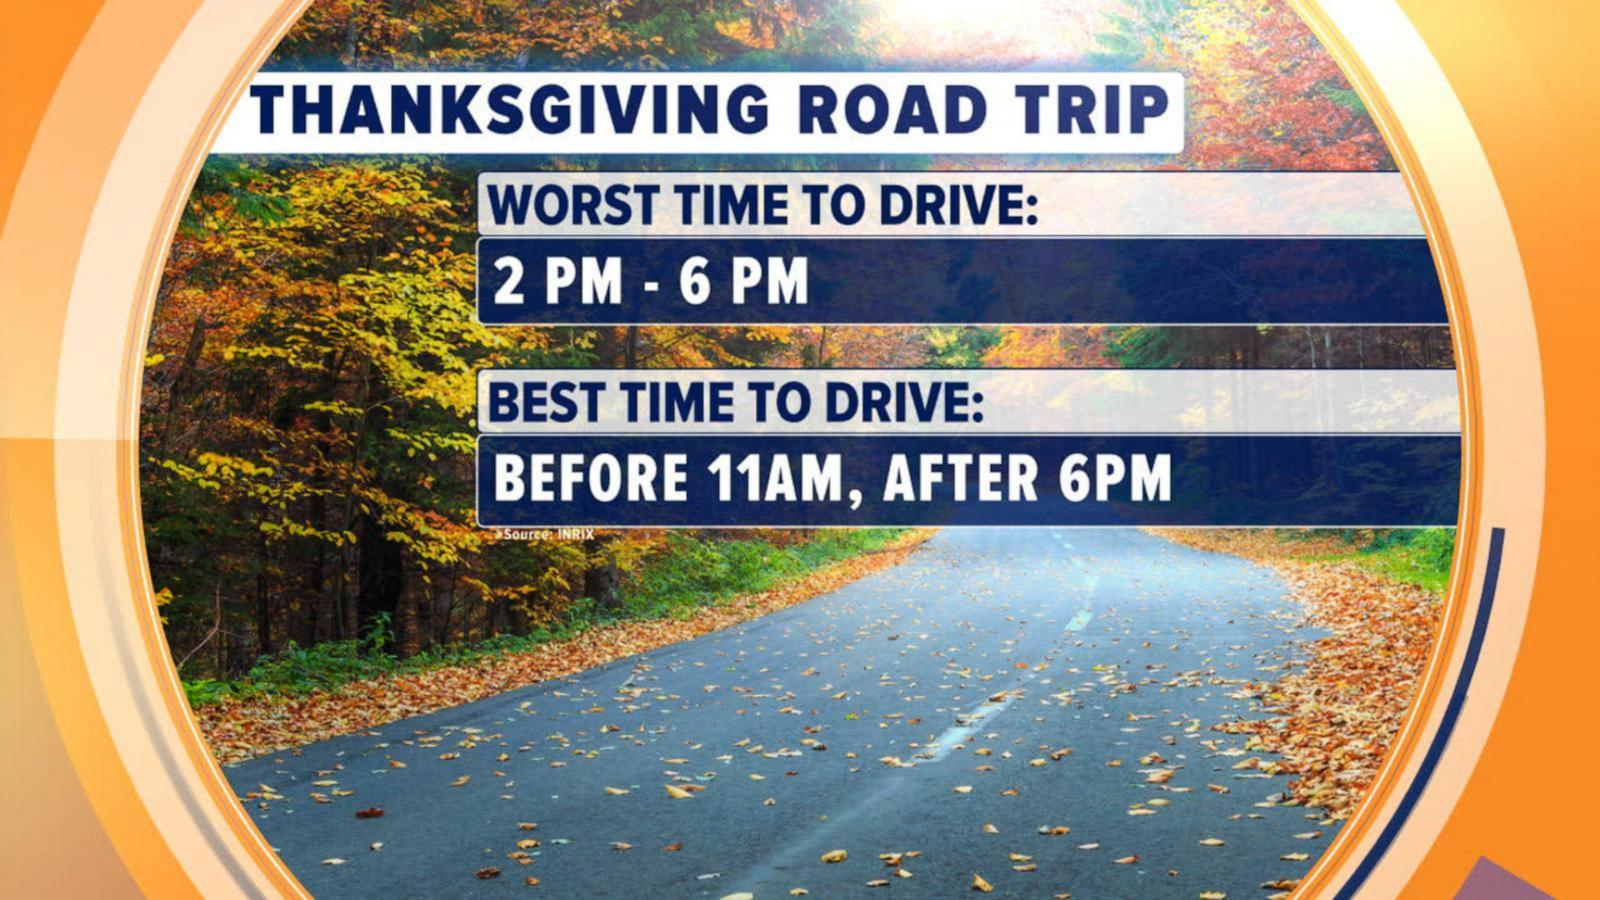 VIDEO: Thanksgiving travelers hit the roads in record numbers